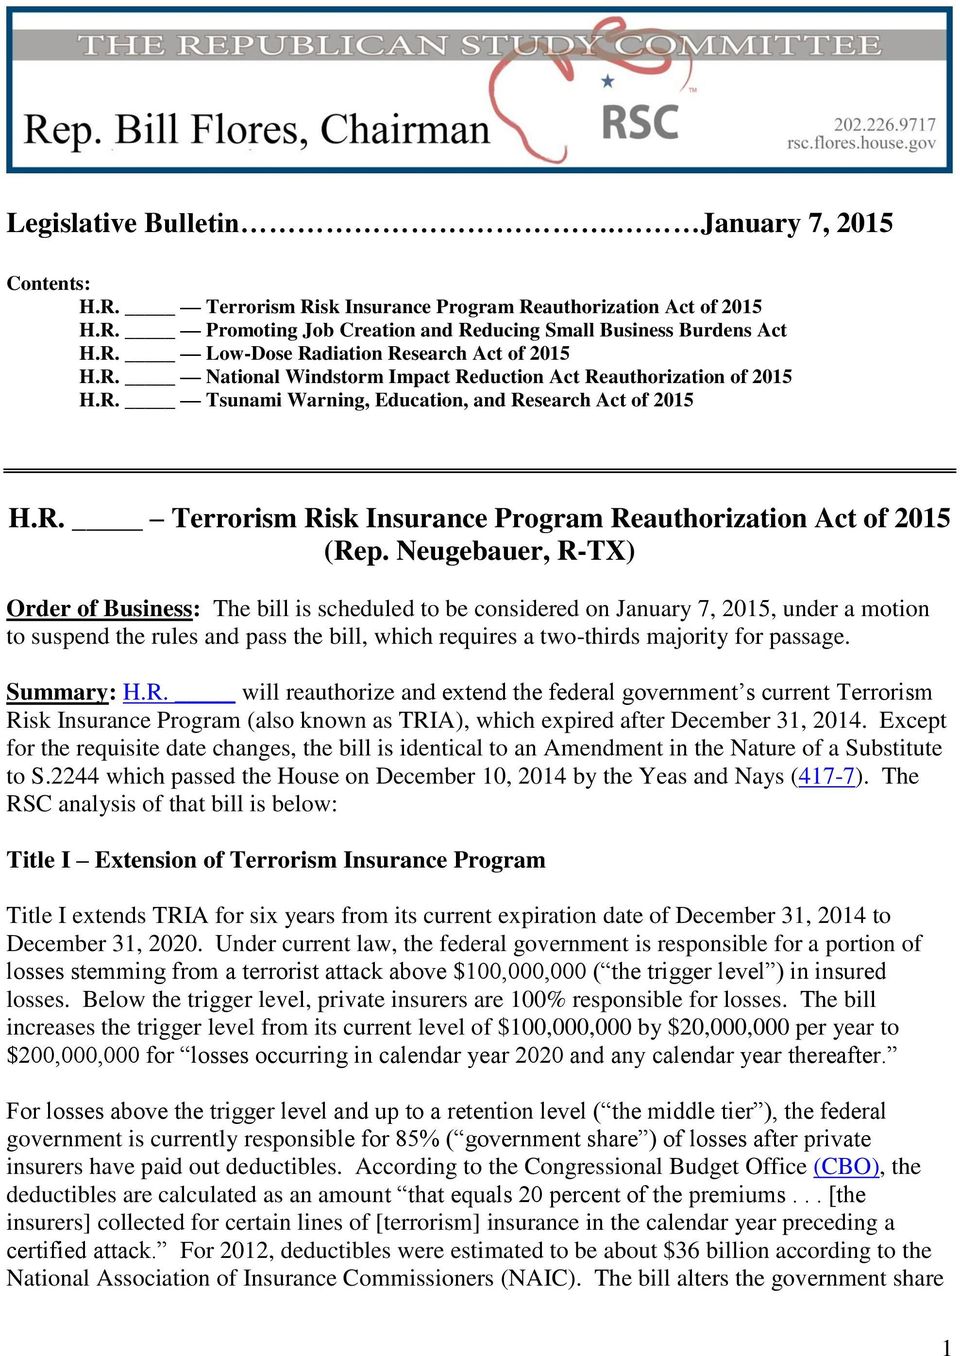 Neugebauer, R-TX) Order of Business: The bill is scheduled to be considered on January 7, 2015, under a motion to suspend the rules and pass the bill, which requires a two-thirds majority for passage.